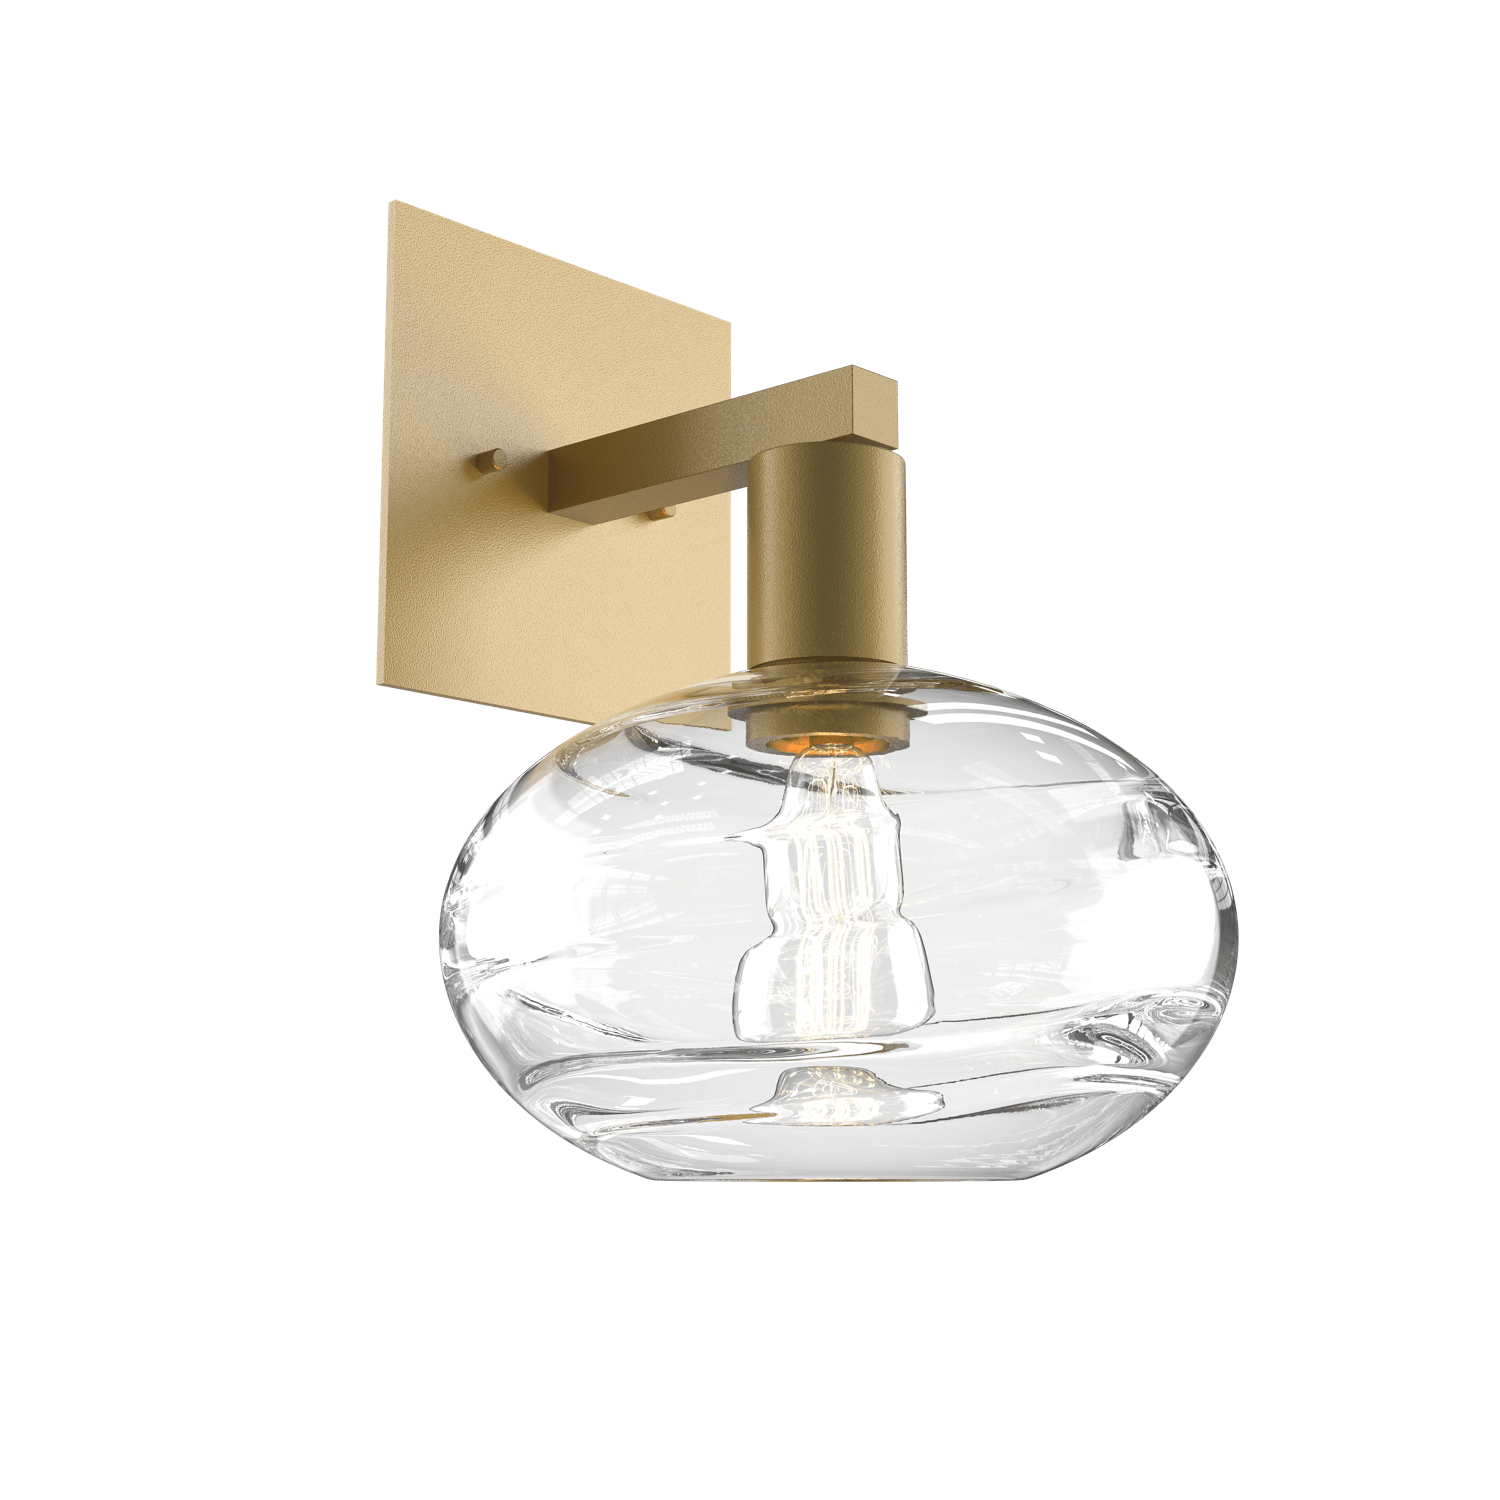 IDB0036-11-GB-OC-Hammerton-Studio-Optic-Blown-Glass-Coppa-wall-sconce-with-gilded-brass-finish-and-optic-clear-blown-glass-shades-and-incandescent-lamping